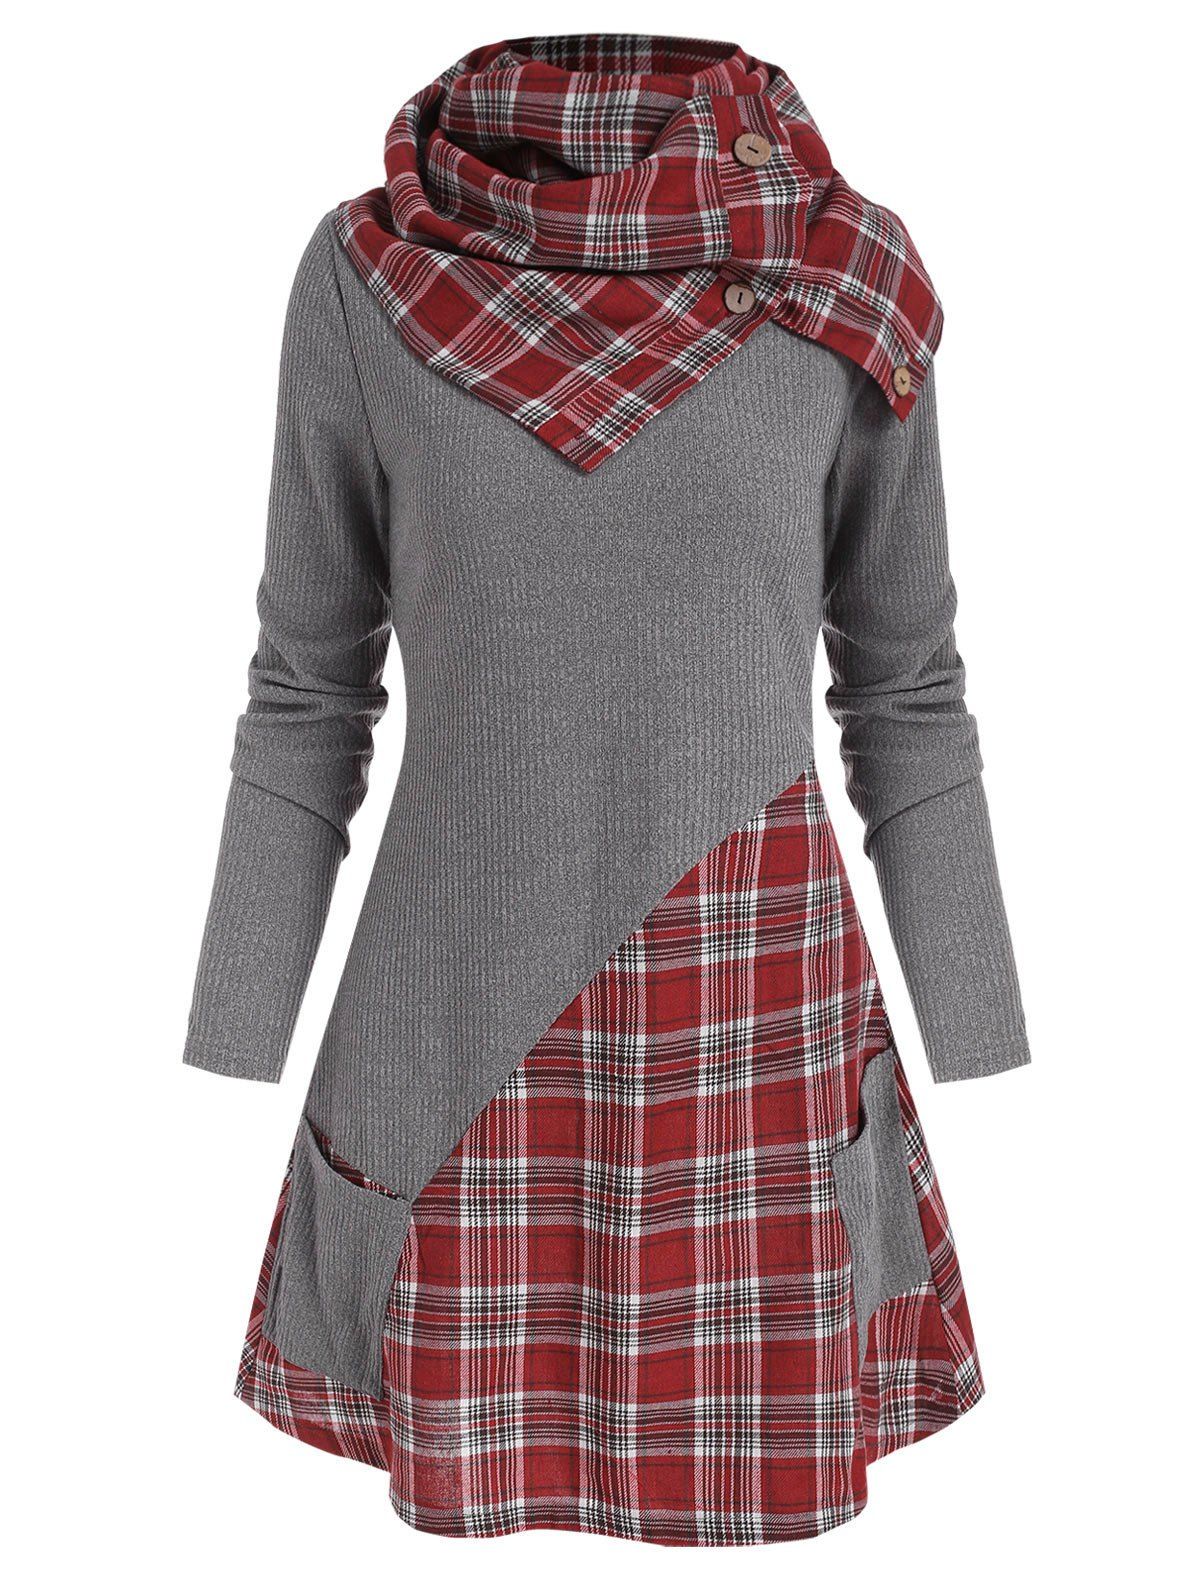 Plaid Insert Pocket Knitwear with Button Scarf - DEEP RED M